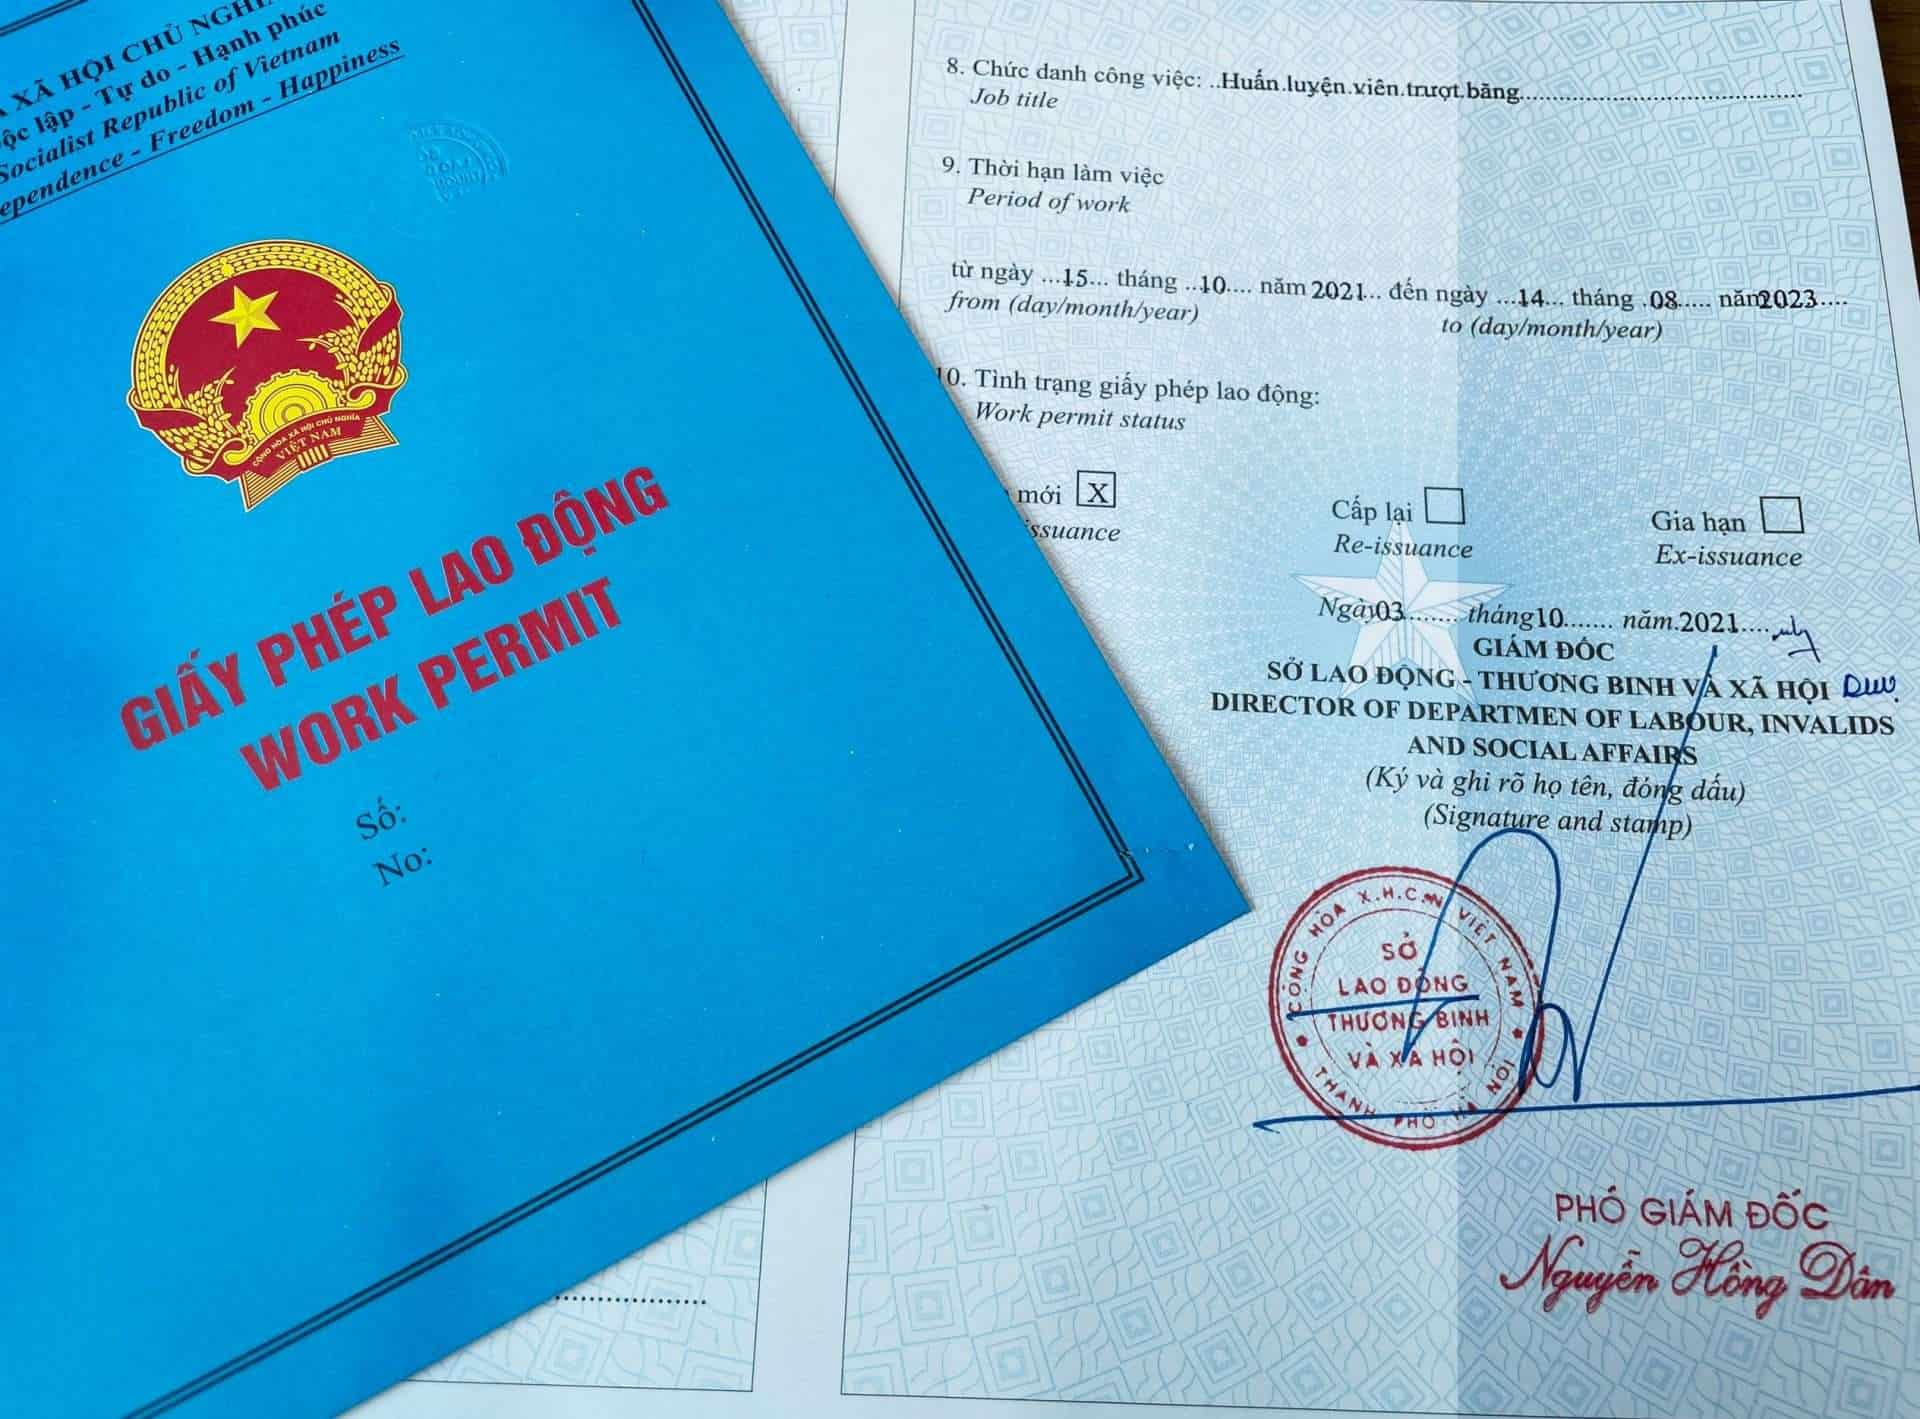 Work Permits in Vietnam are Tougher to get - Risk in Asia